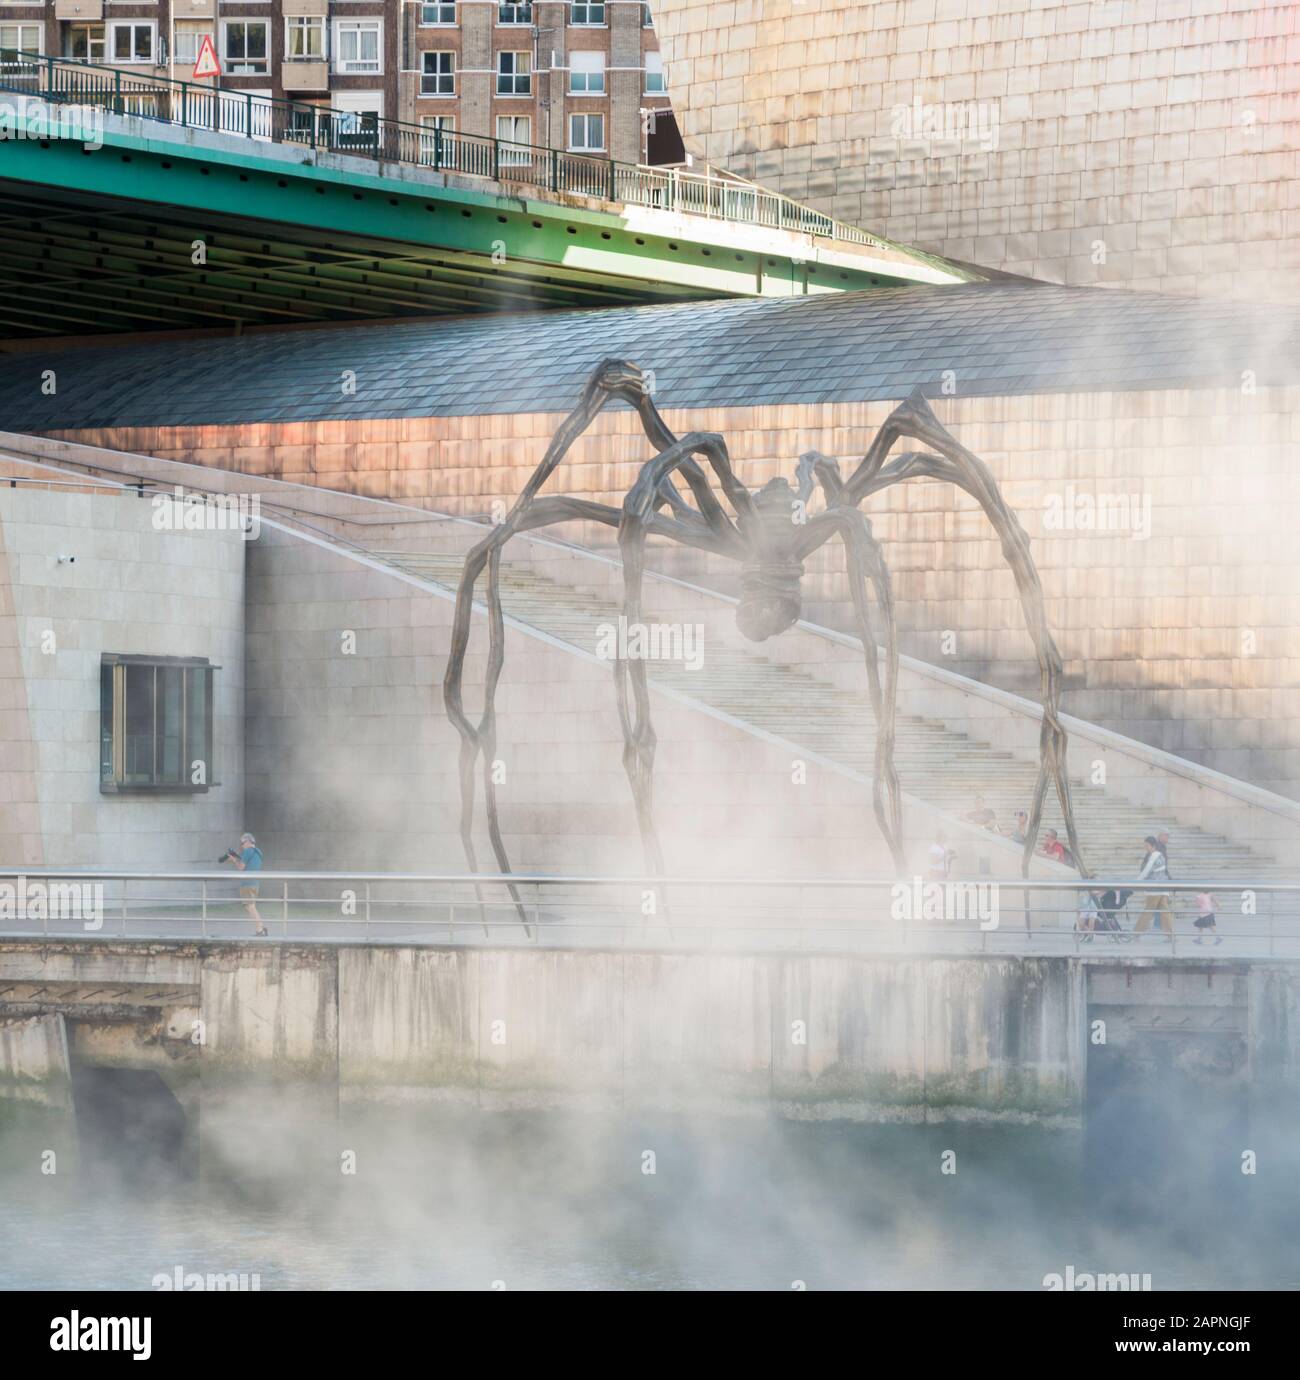 Maman, a giant spider sculpture outside the Guggenheim Museum in Bilbao, Spain. Stock Photo